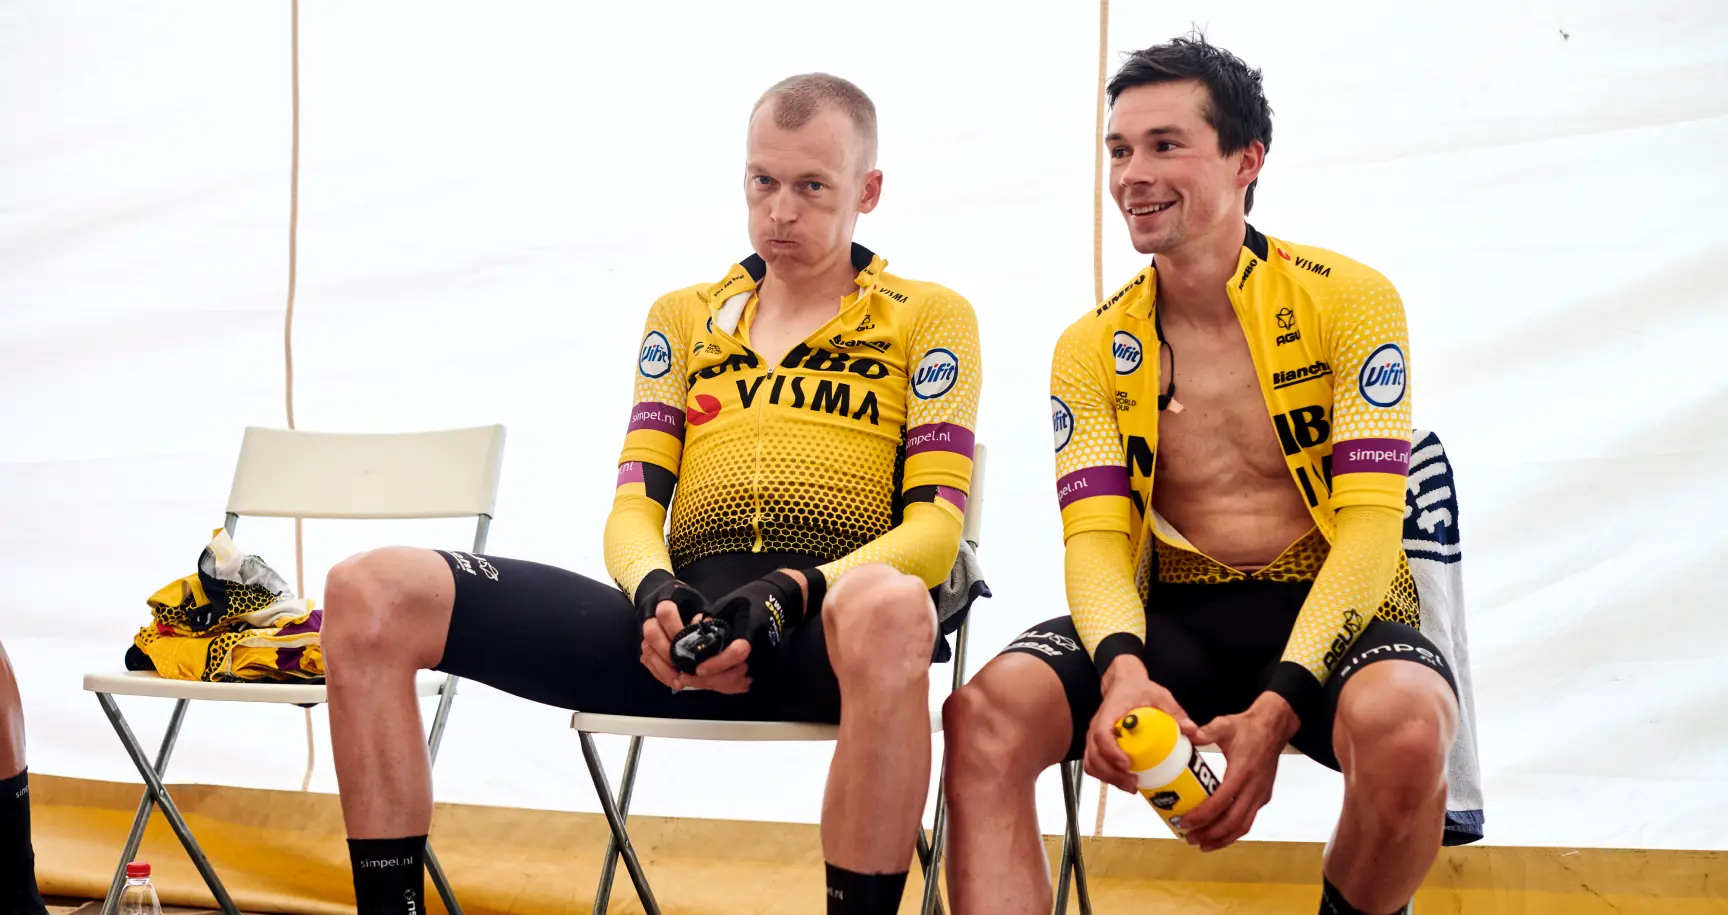 Primoz Roglic after a hard team time trial with teammate robert geesink